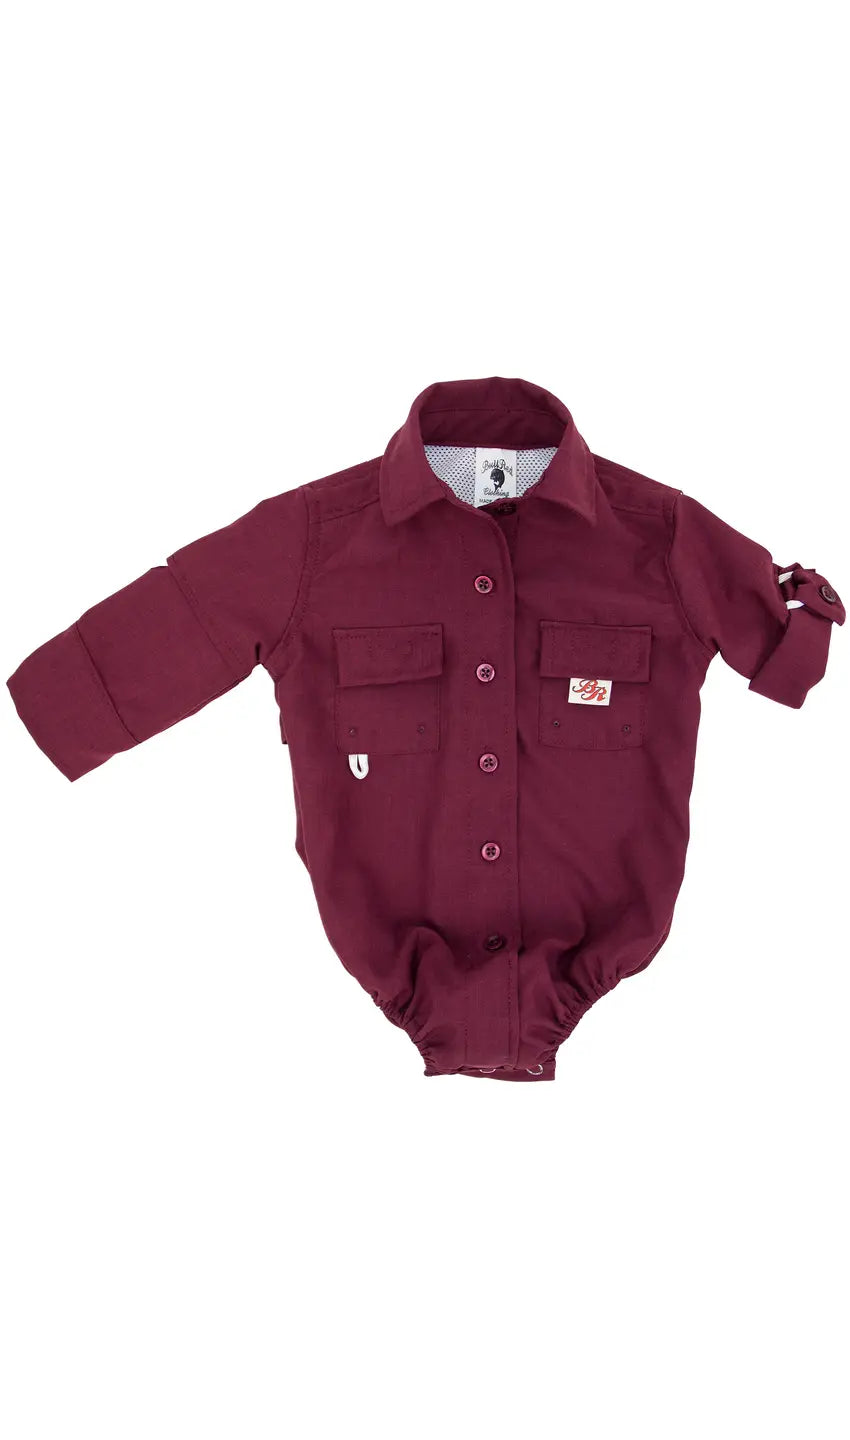 Perfect Fishing Shirt Onesie Boys or Girls – The Goud Co.